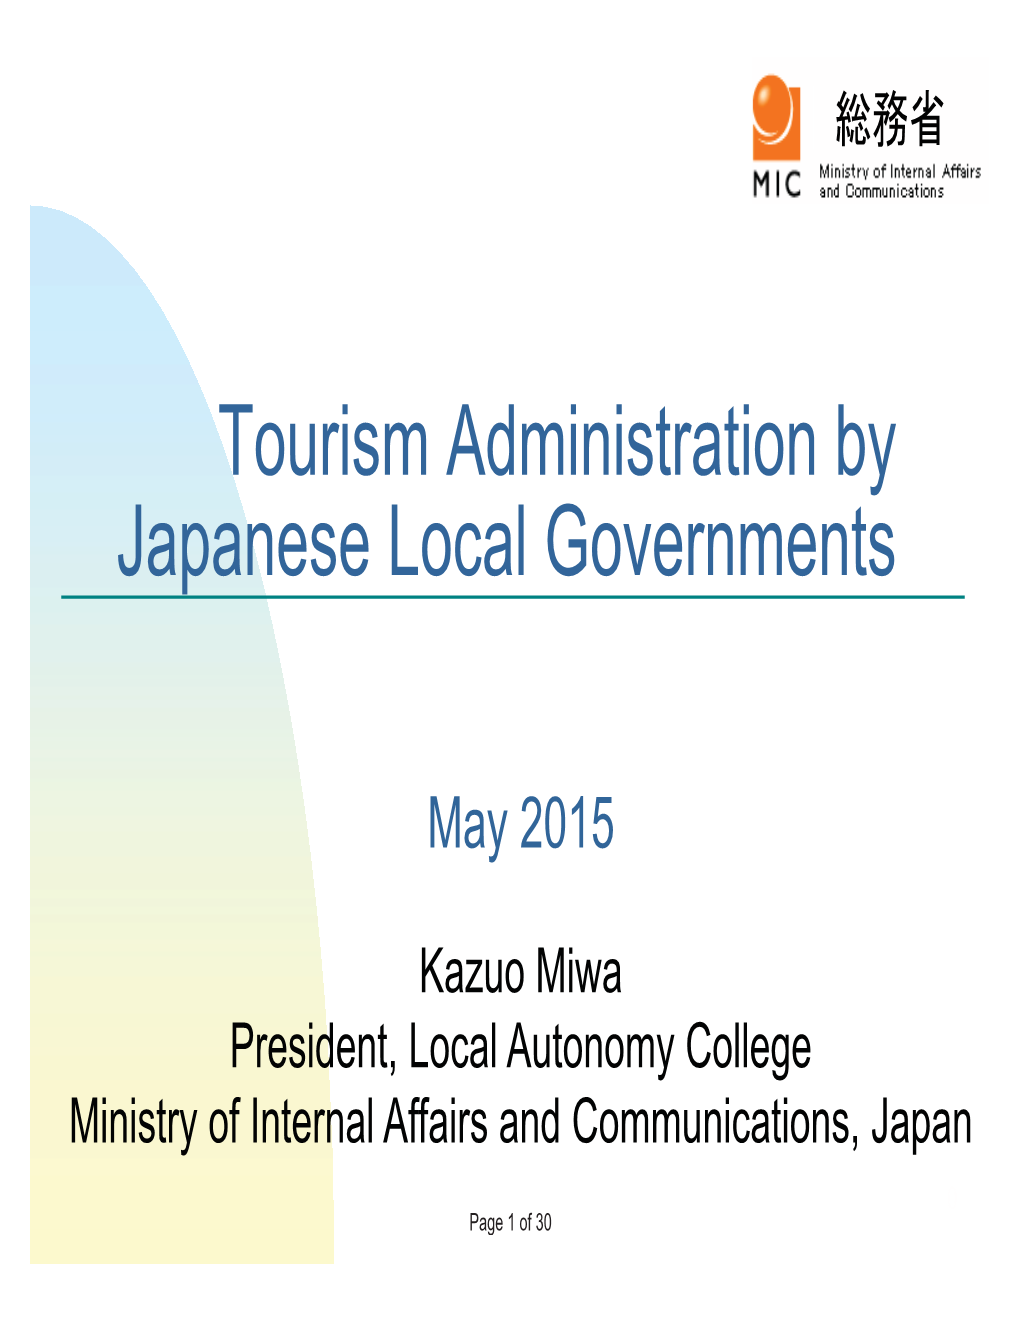 Tourism Administration by Japanese Local Governments